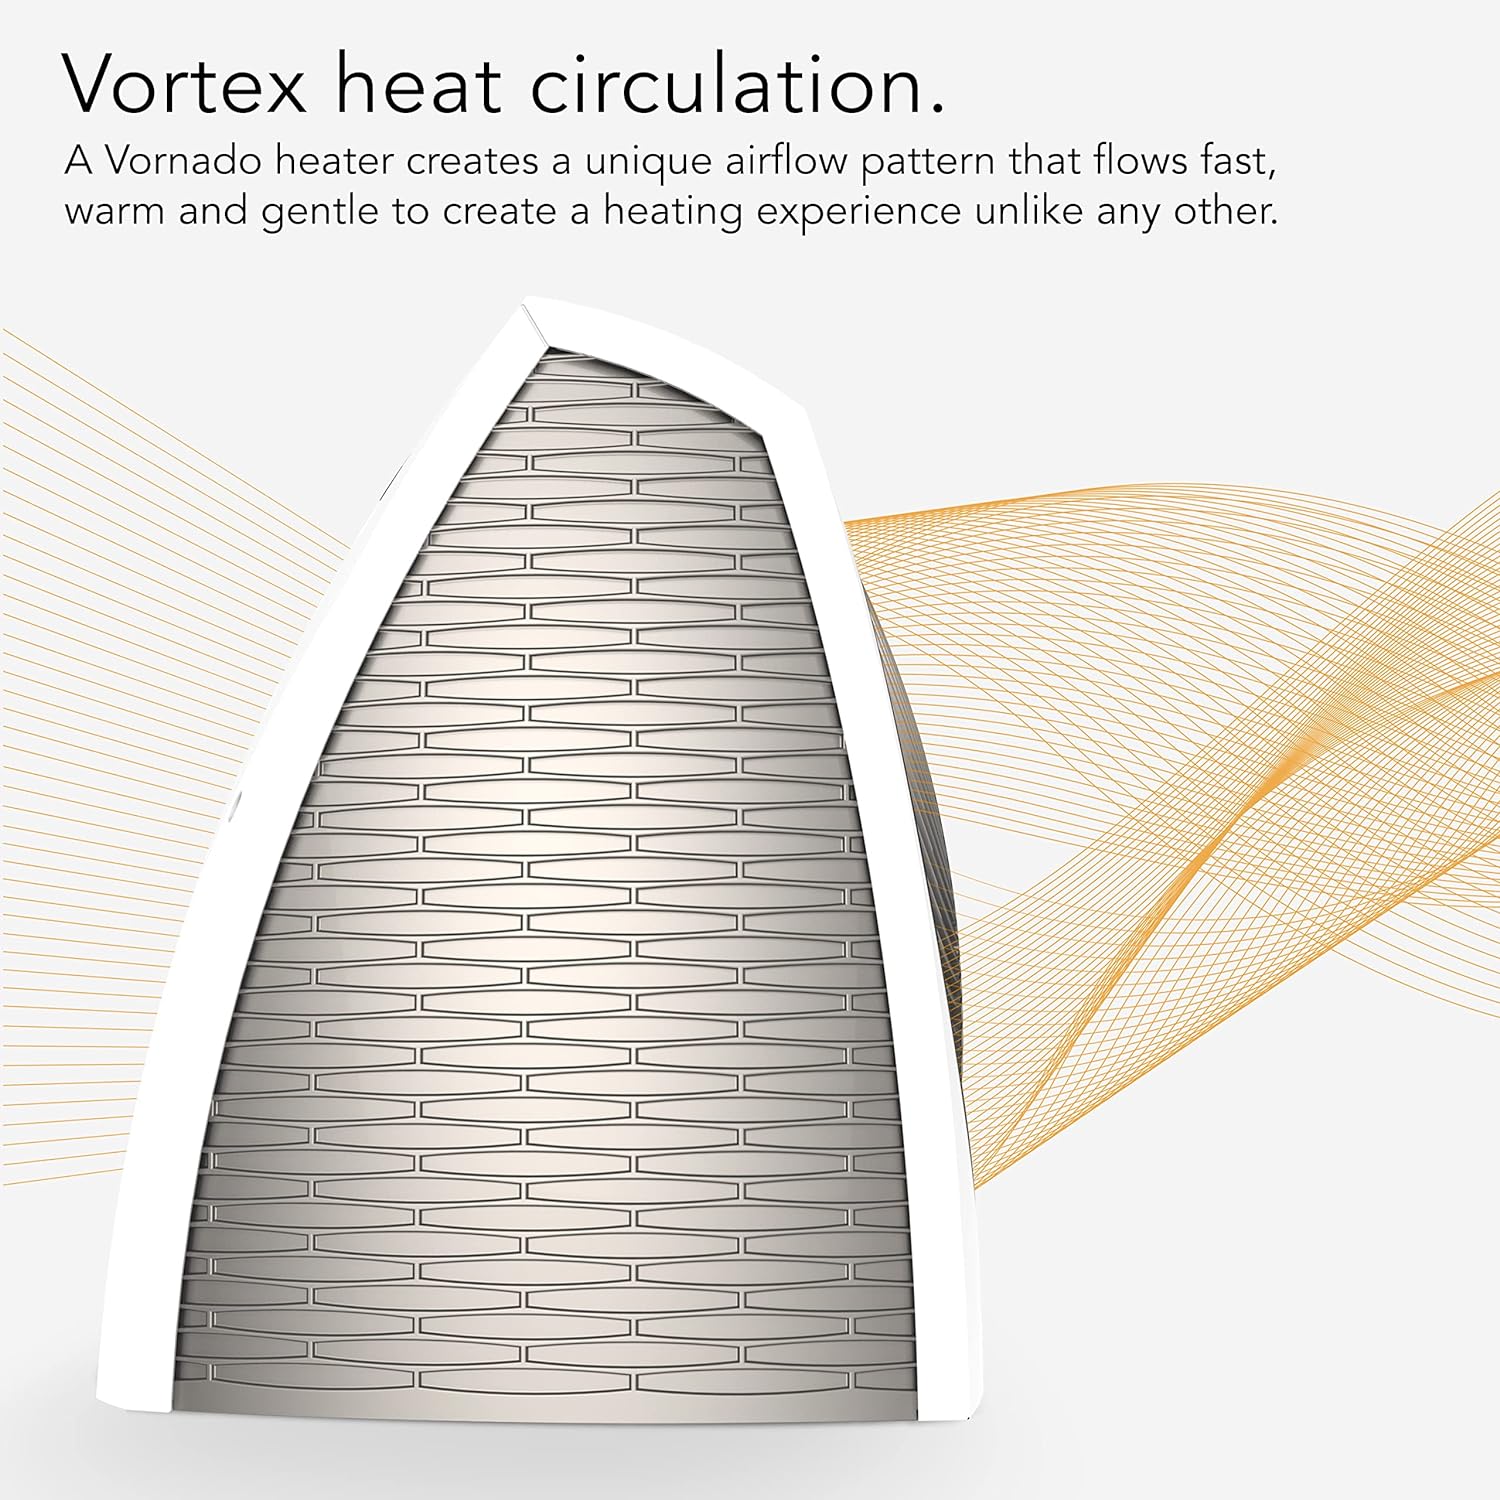 Vornado AVH10 Vortex Heater with Auto Climate Control, 2 Heat Settings, Fan Only Option, Digital Display, Advanced Safety Features, Whole Room, White